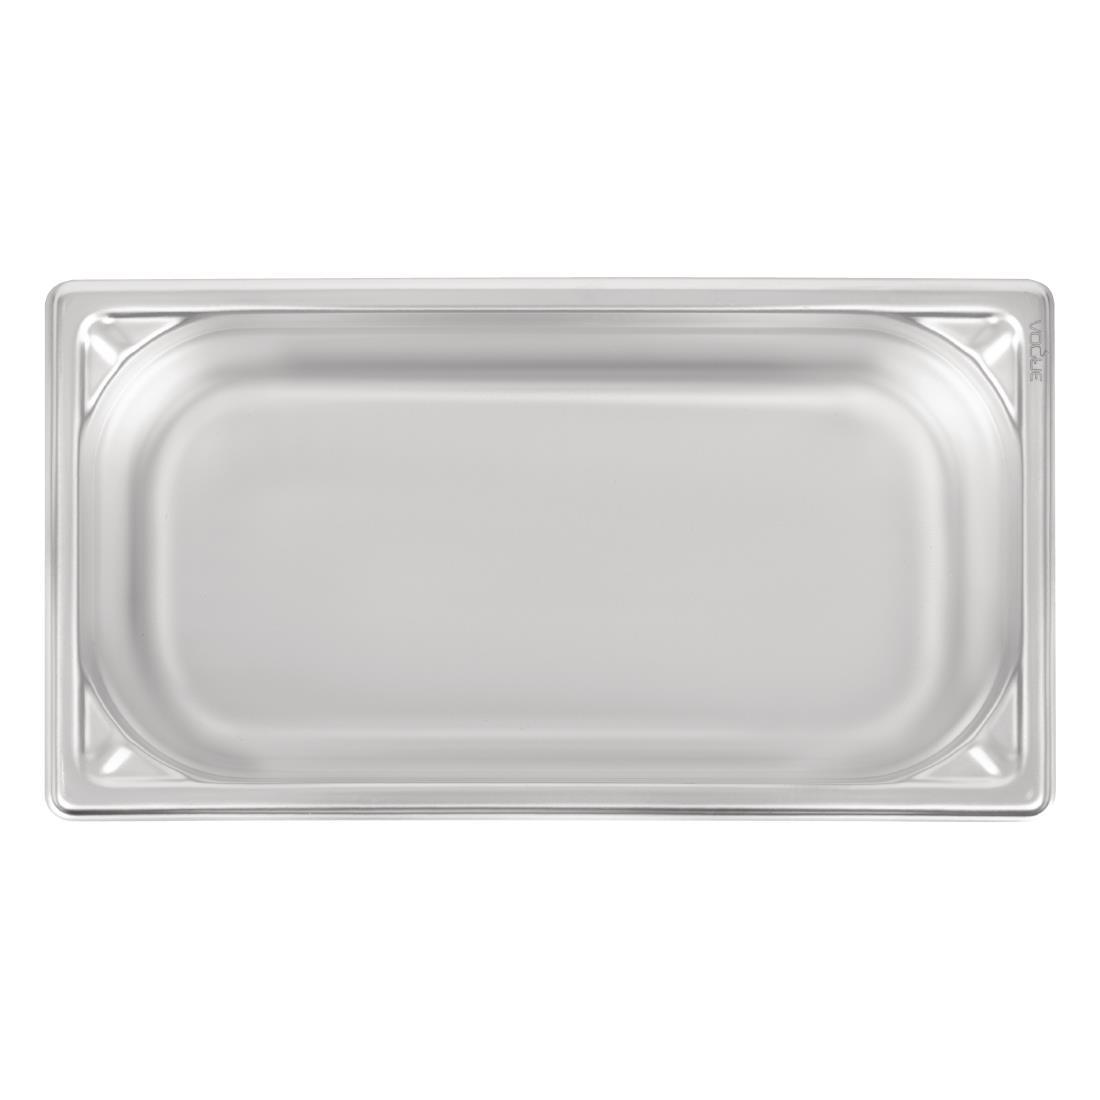 Vogue Heavy Duty Stainless Steel 1/3 Gastronorm Pan 100mm - DW443  - 4